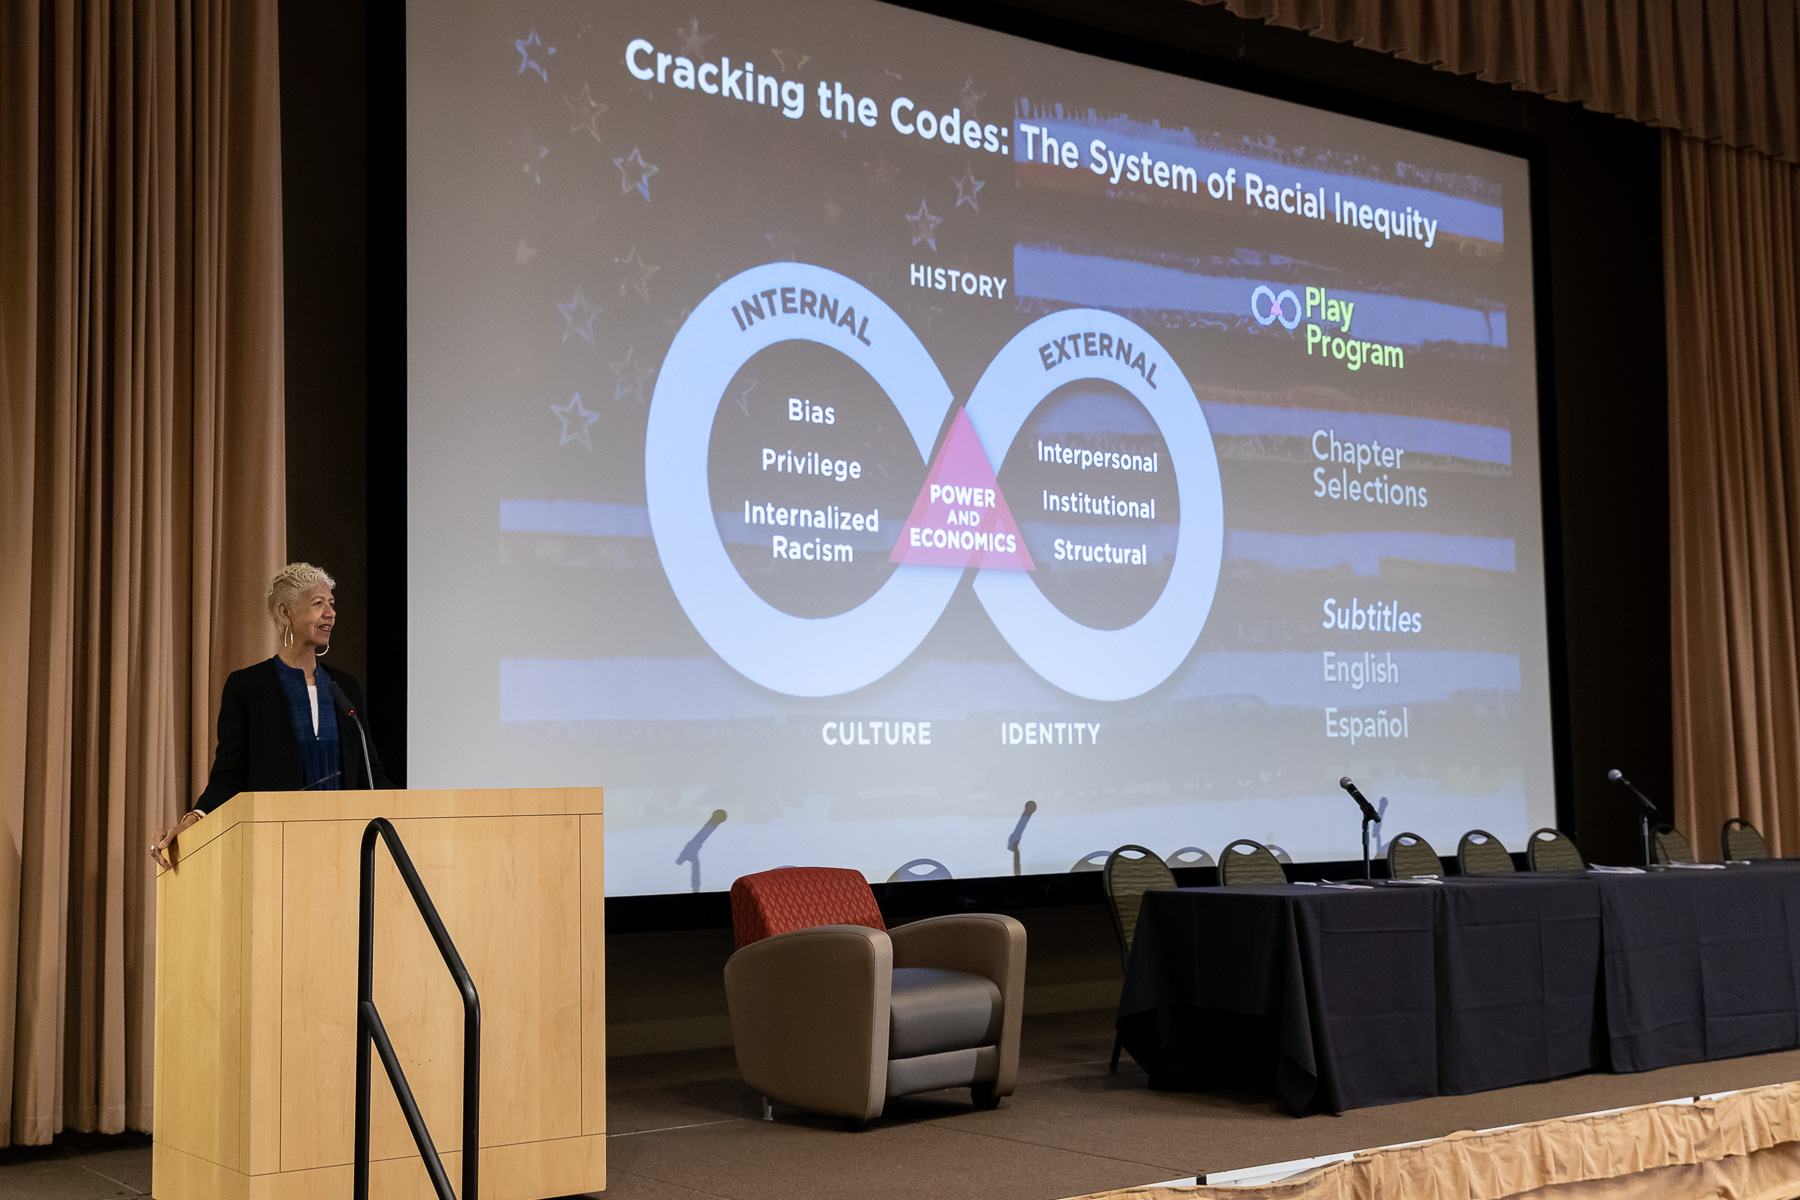 Huggins facilitated a screening and discussion of the documentary "Cracking the Codes: The System of Racial Inequity." (DePaul University/Jeff Carrion)